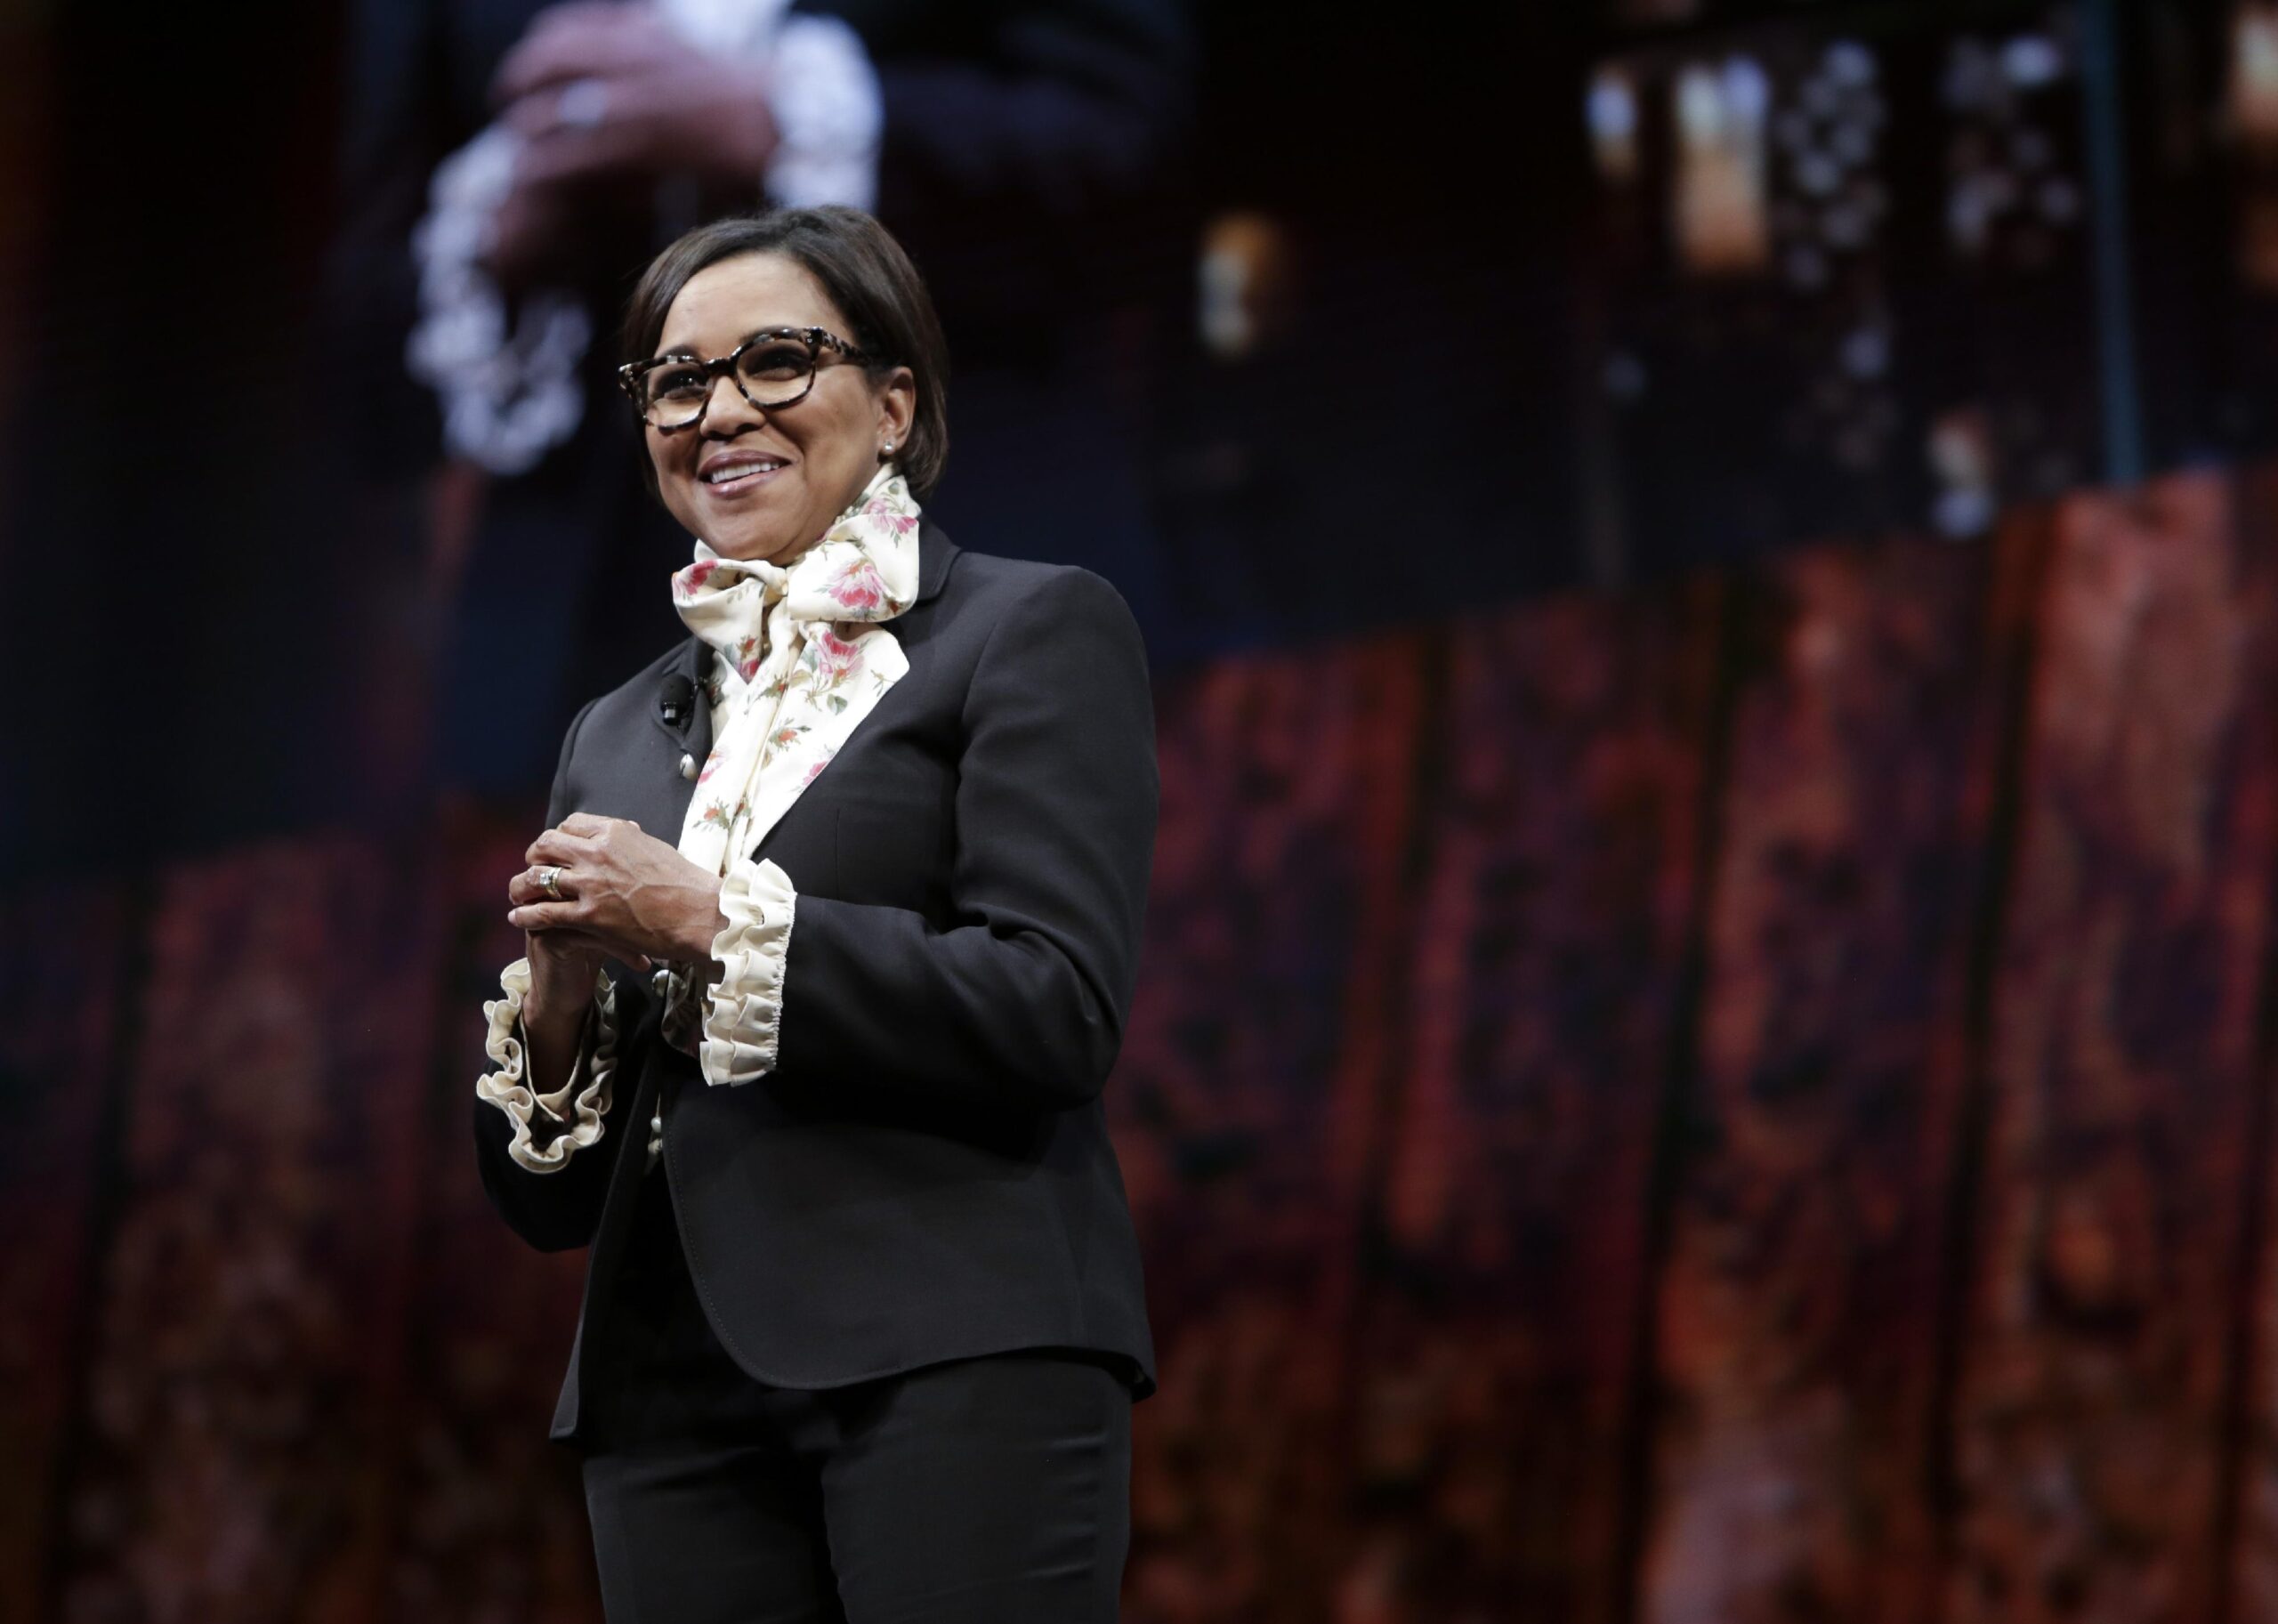 Women are breaking the glass ceiling to lead some of the country's top companies. Here's a look at the top women CEOs of the 2022 Fortune 500 companies.  